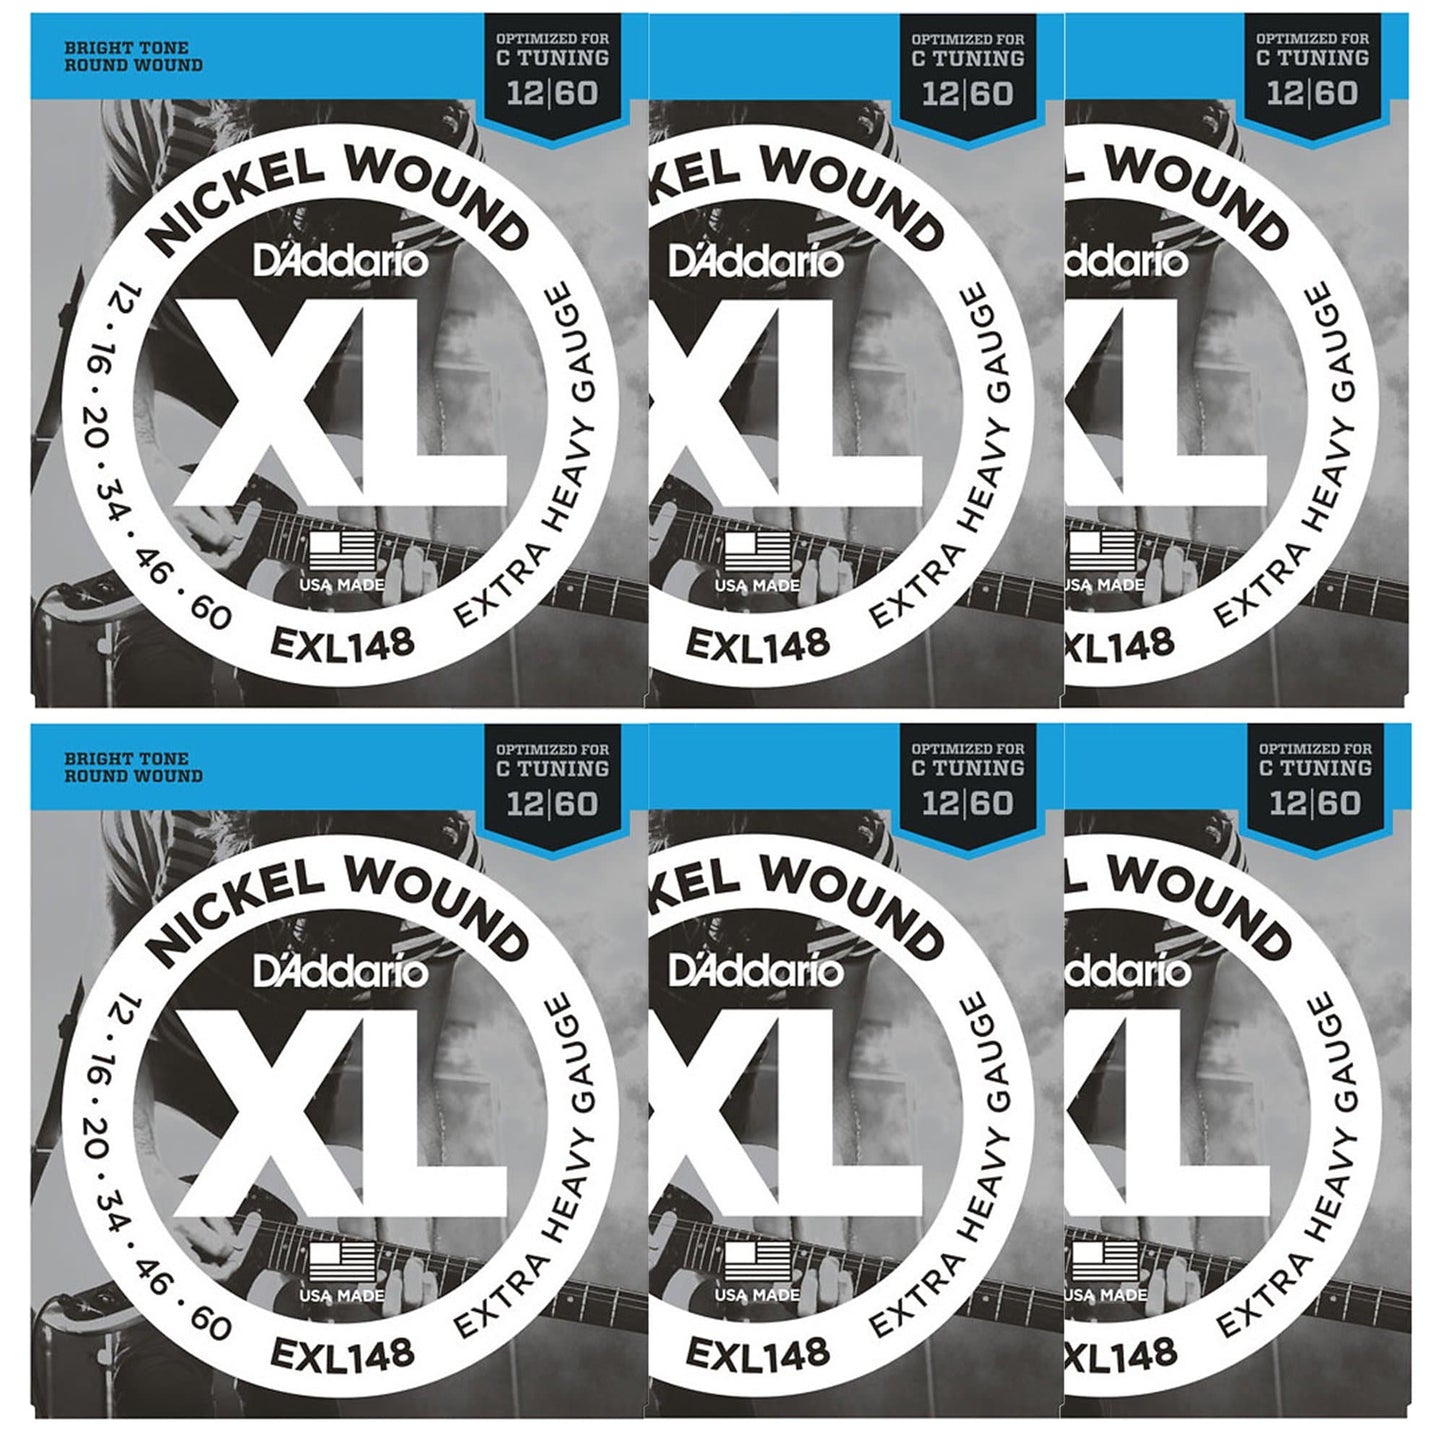 D'Addario EXL148 Electric Extra Heavy 12-60 6 Pack Bundle Accessories / Strings / Guitar Strings